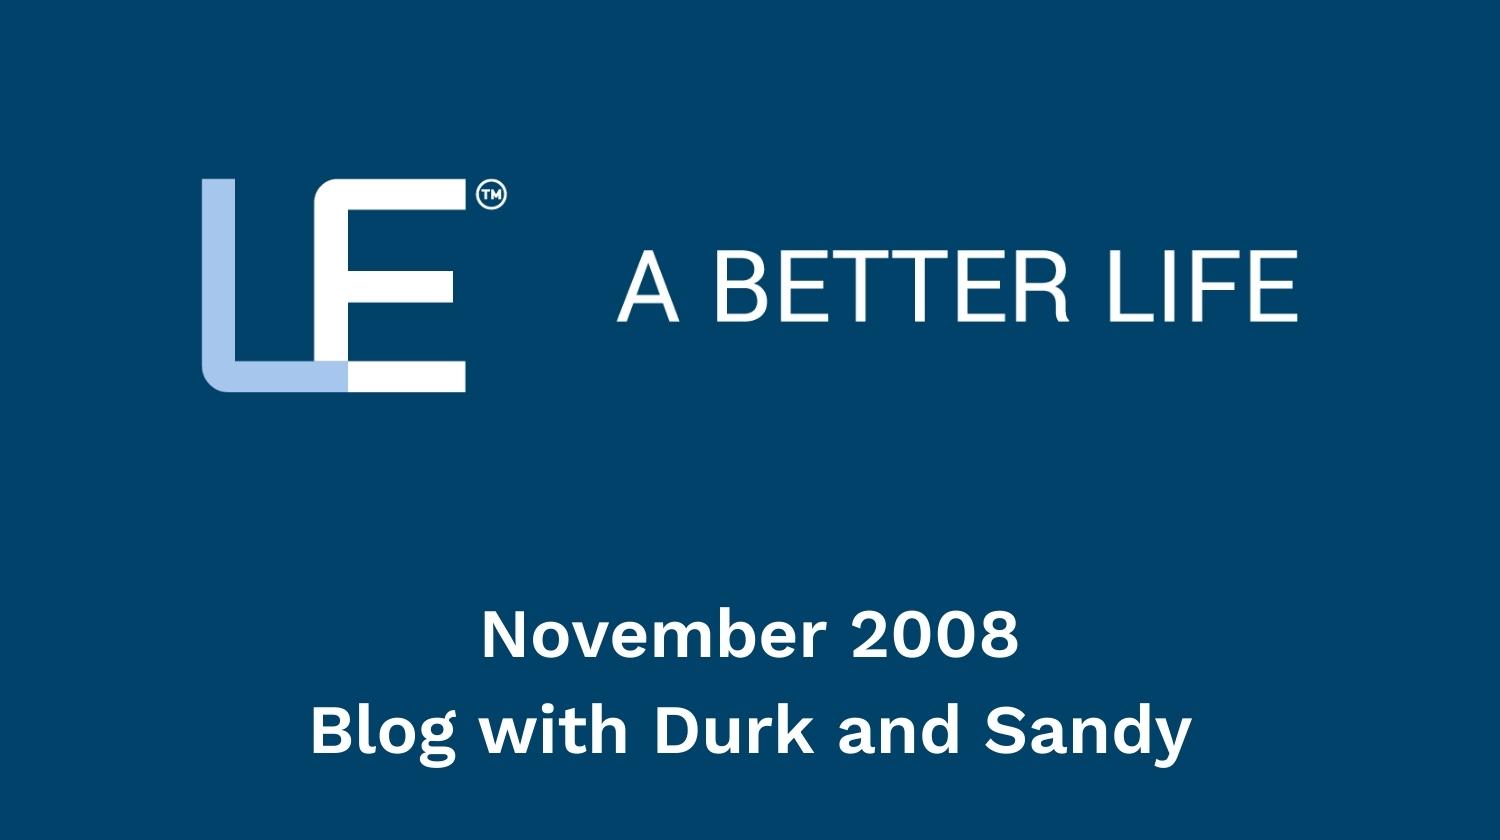 November 2008 Blog with Durk and Sandy